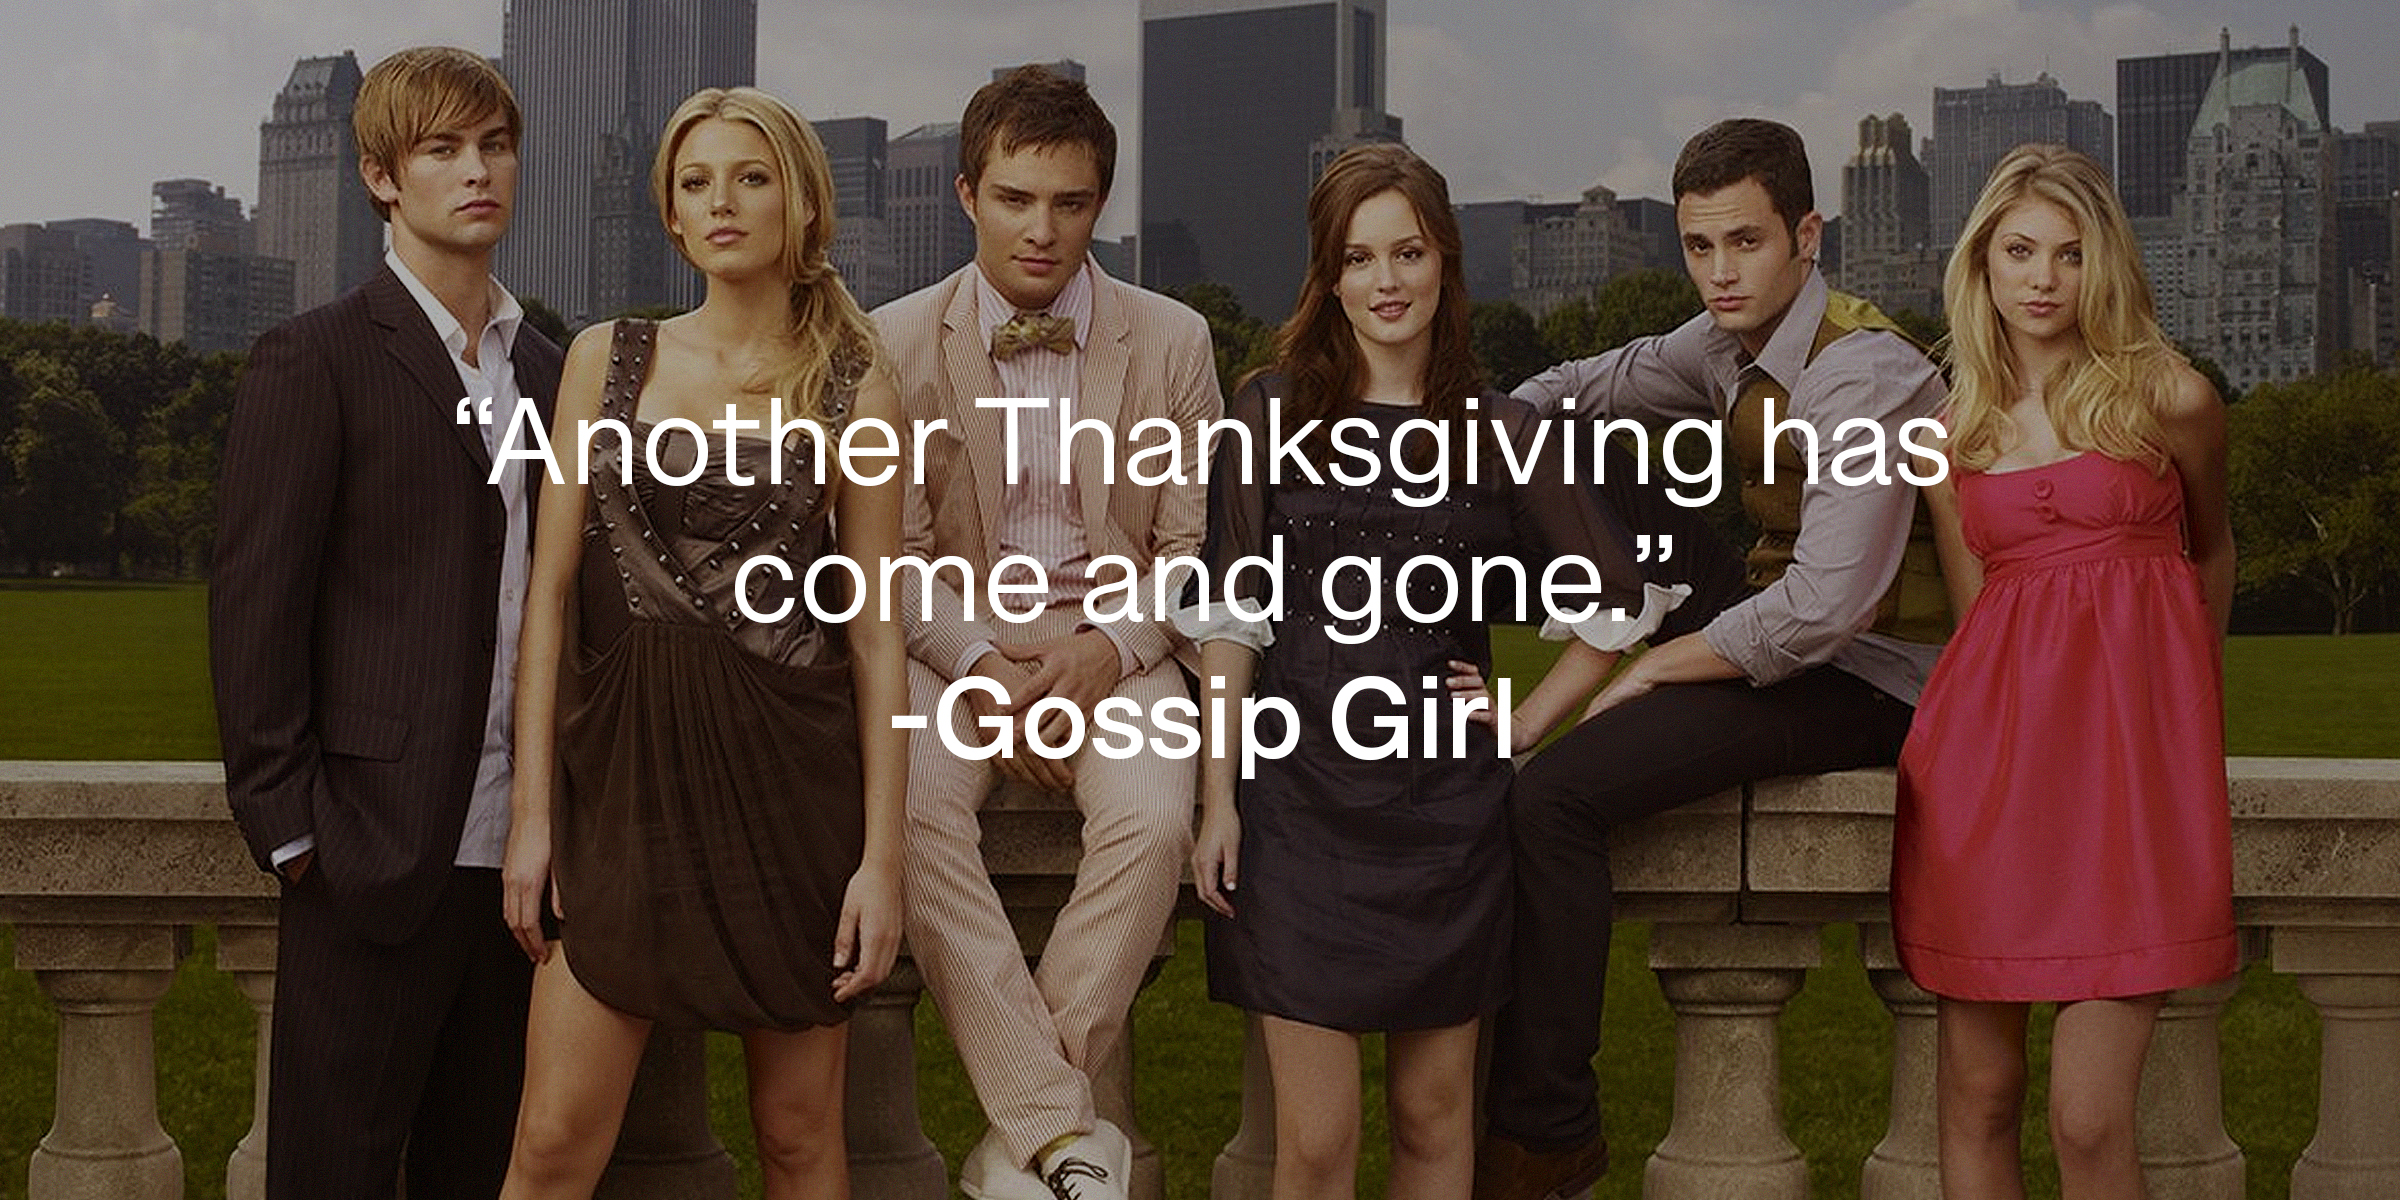 Image from "Gossip Girl" with the quote: "Another Thanksgiving has come and gone." | Source: facebook.com/GossipGirl